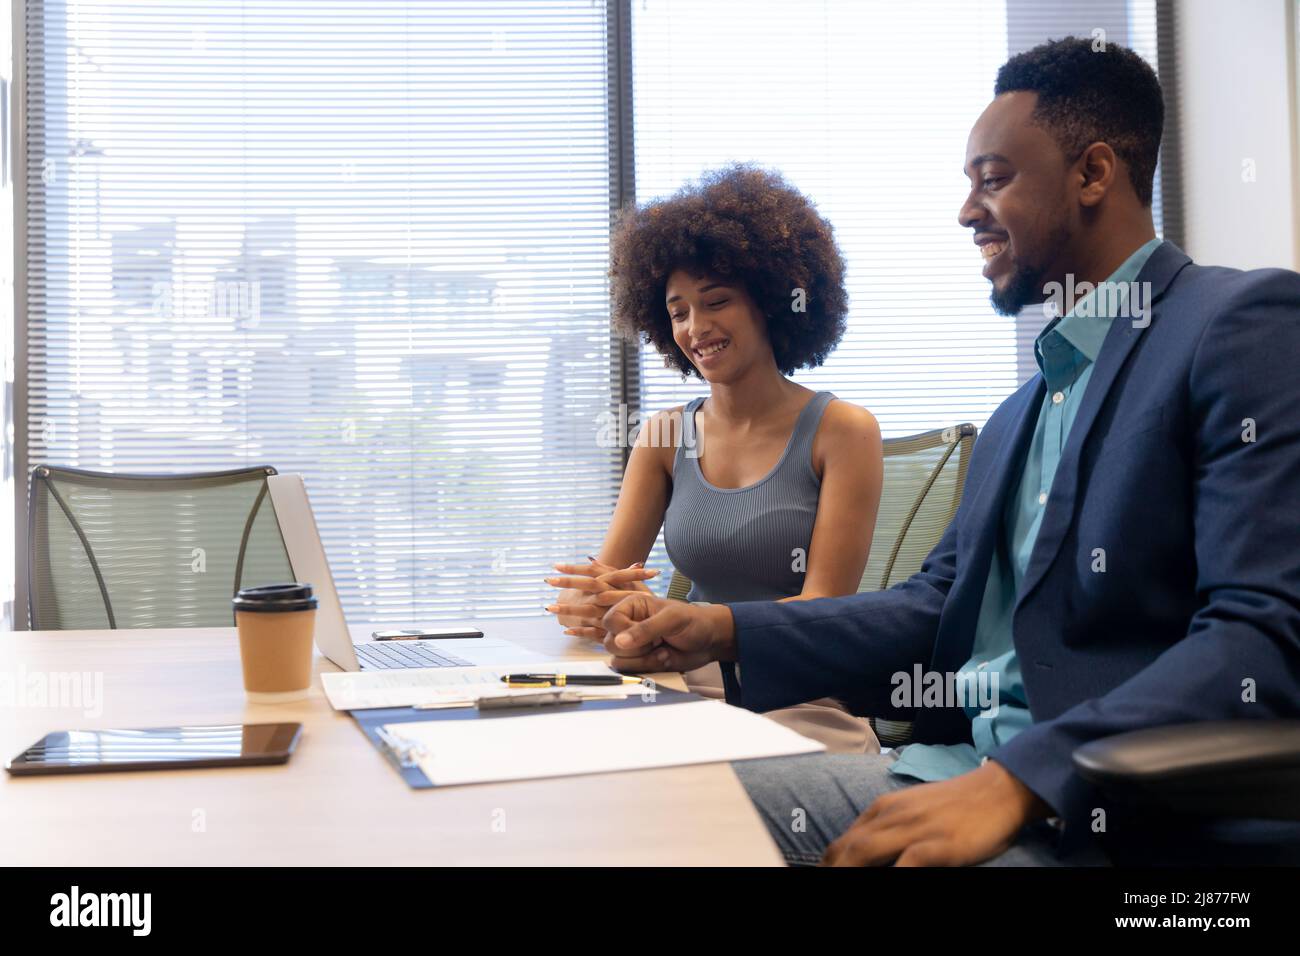 Smiling multiracial businessman and businesswoman discussing during meeting in boardroom Stock Photo